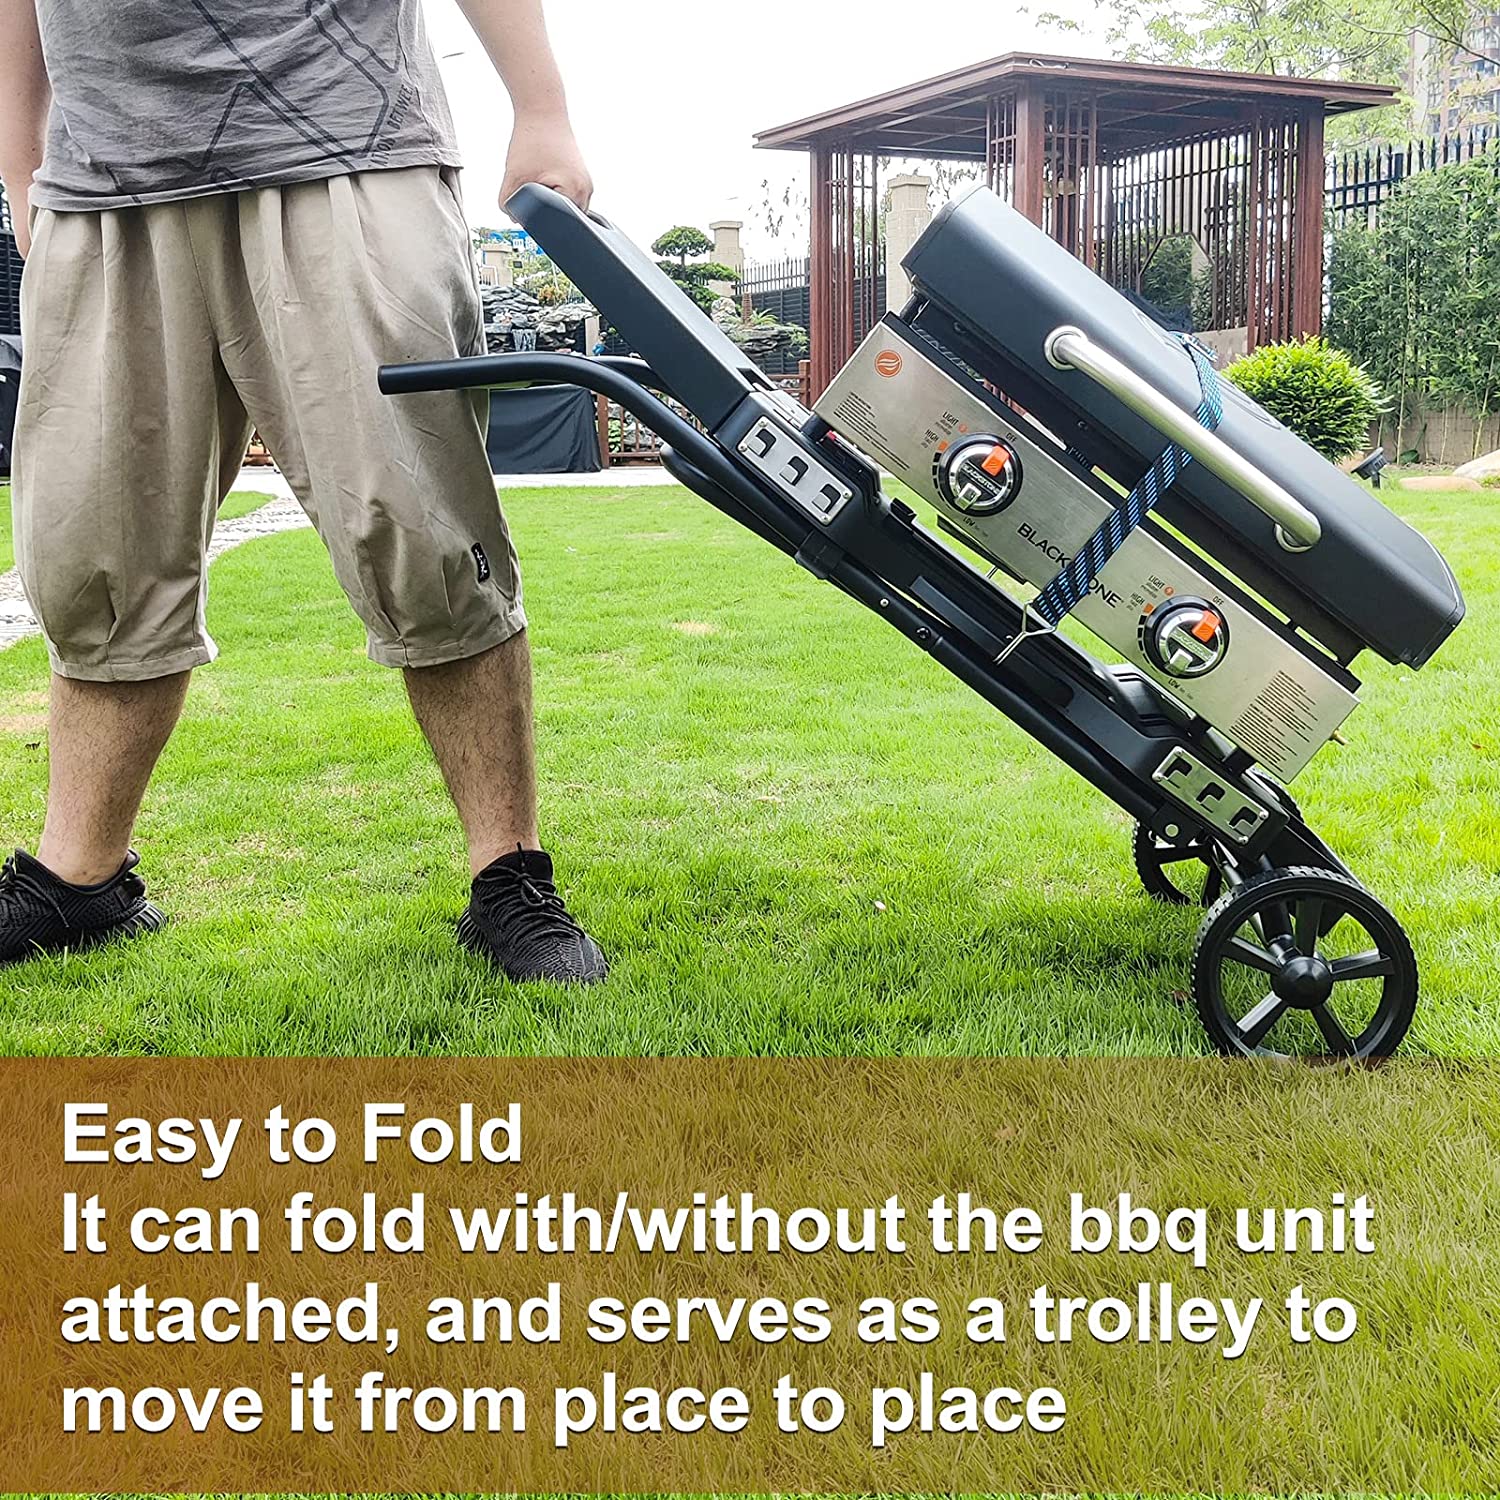 Portable Rolling Cart Folding Stand for Weber Q Series GAS Grills